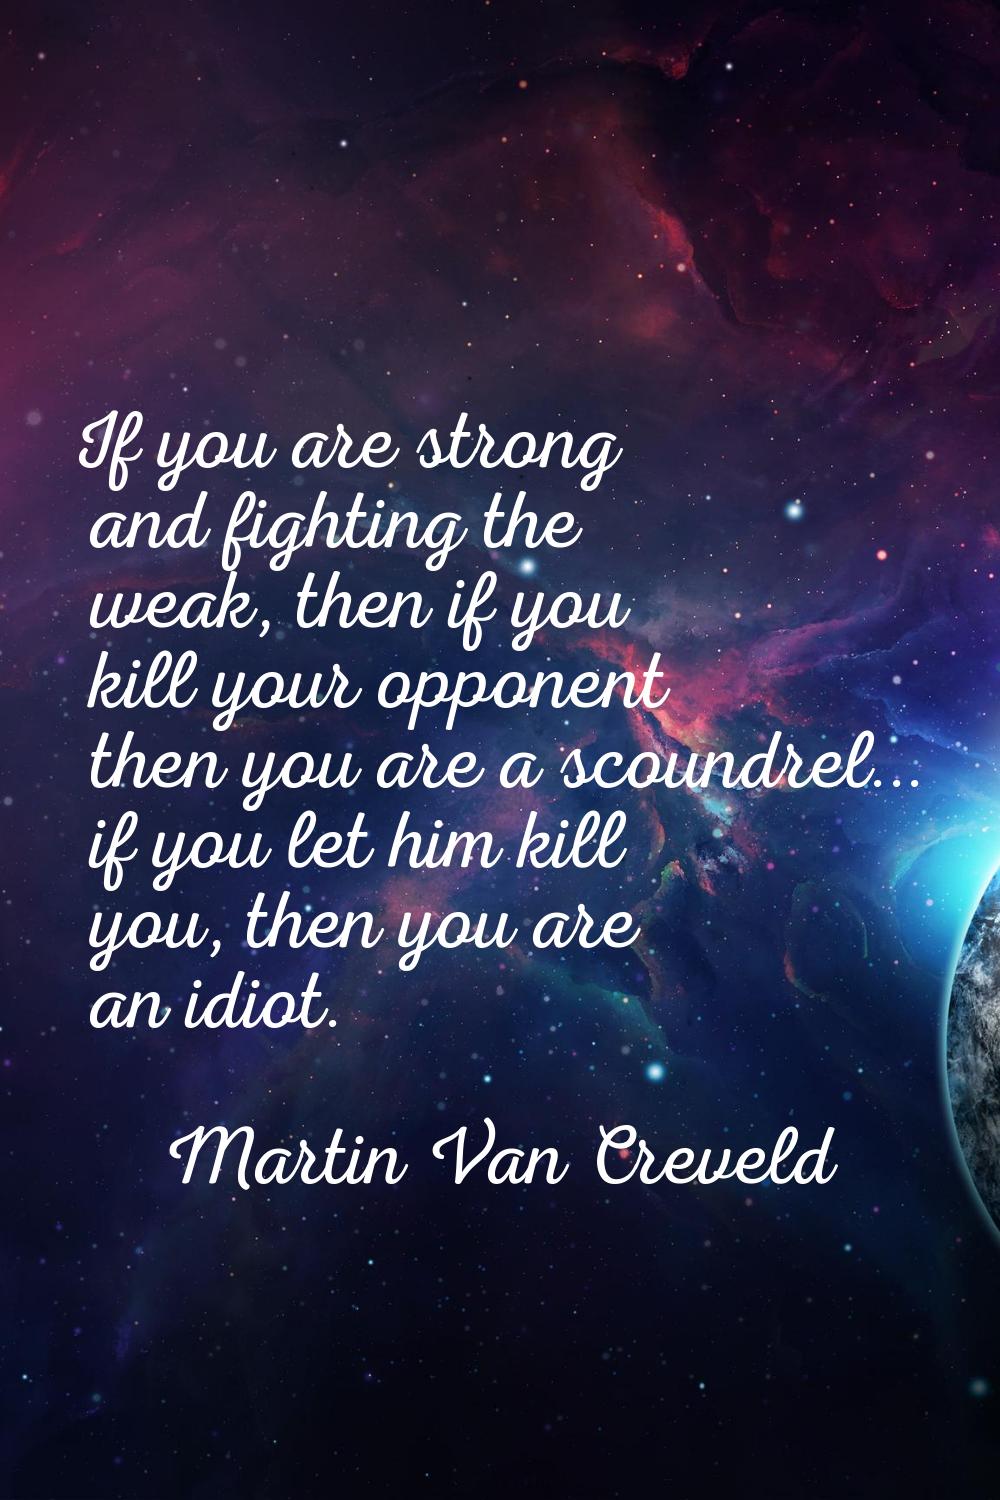 If you are strong and fighting the weak, then if you kill your opponent then you are a scoundrel...